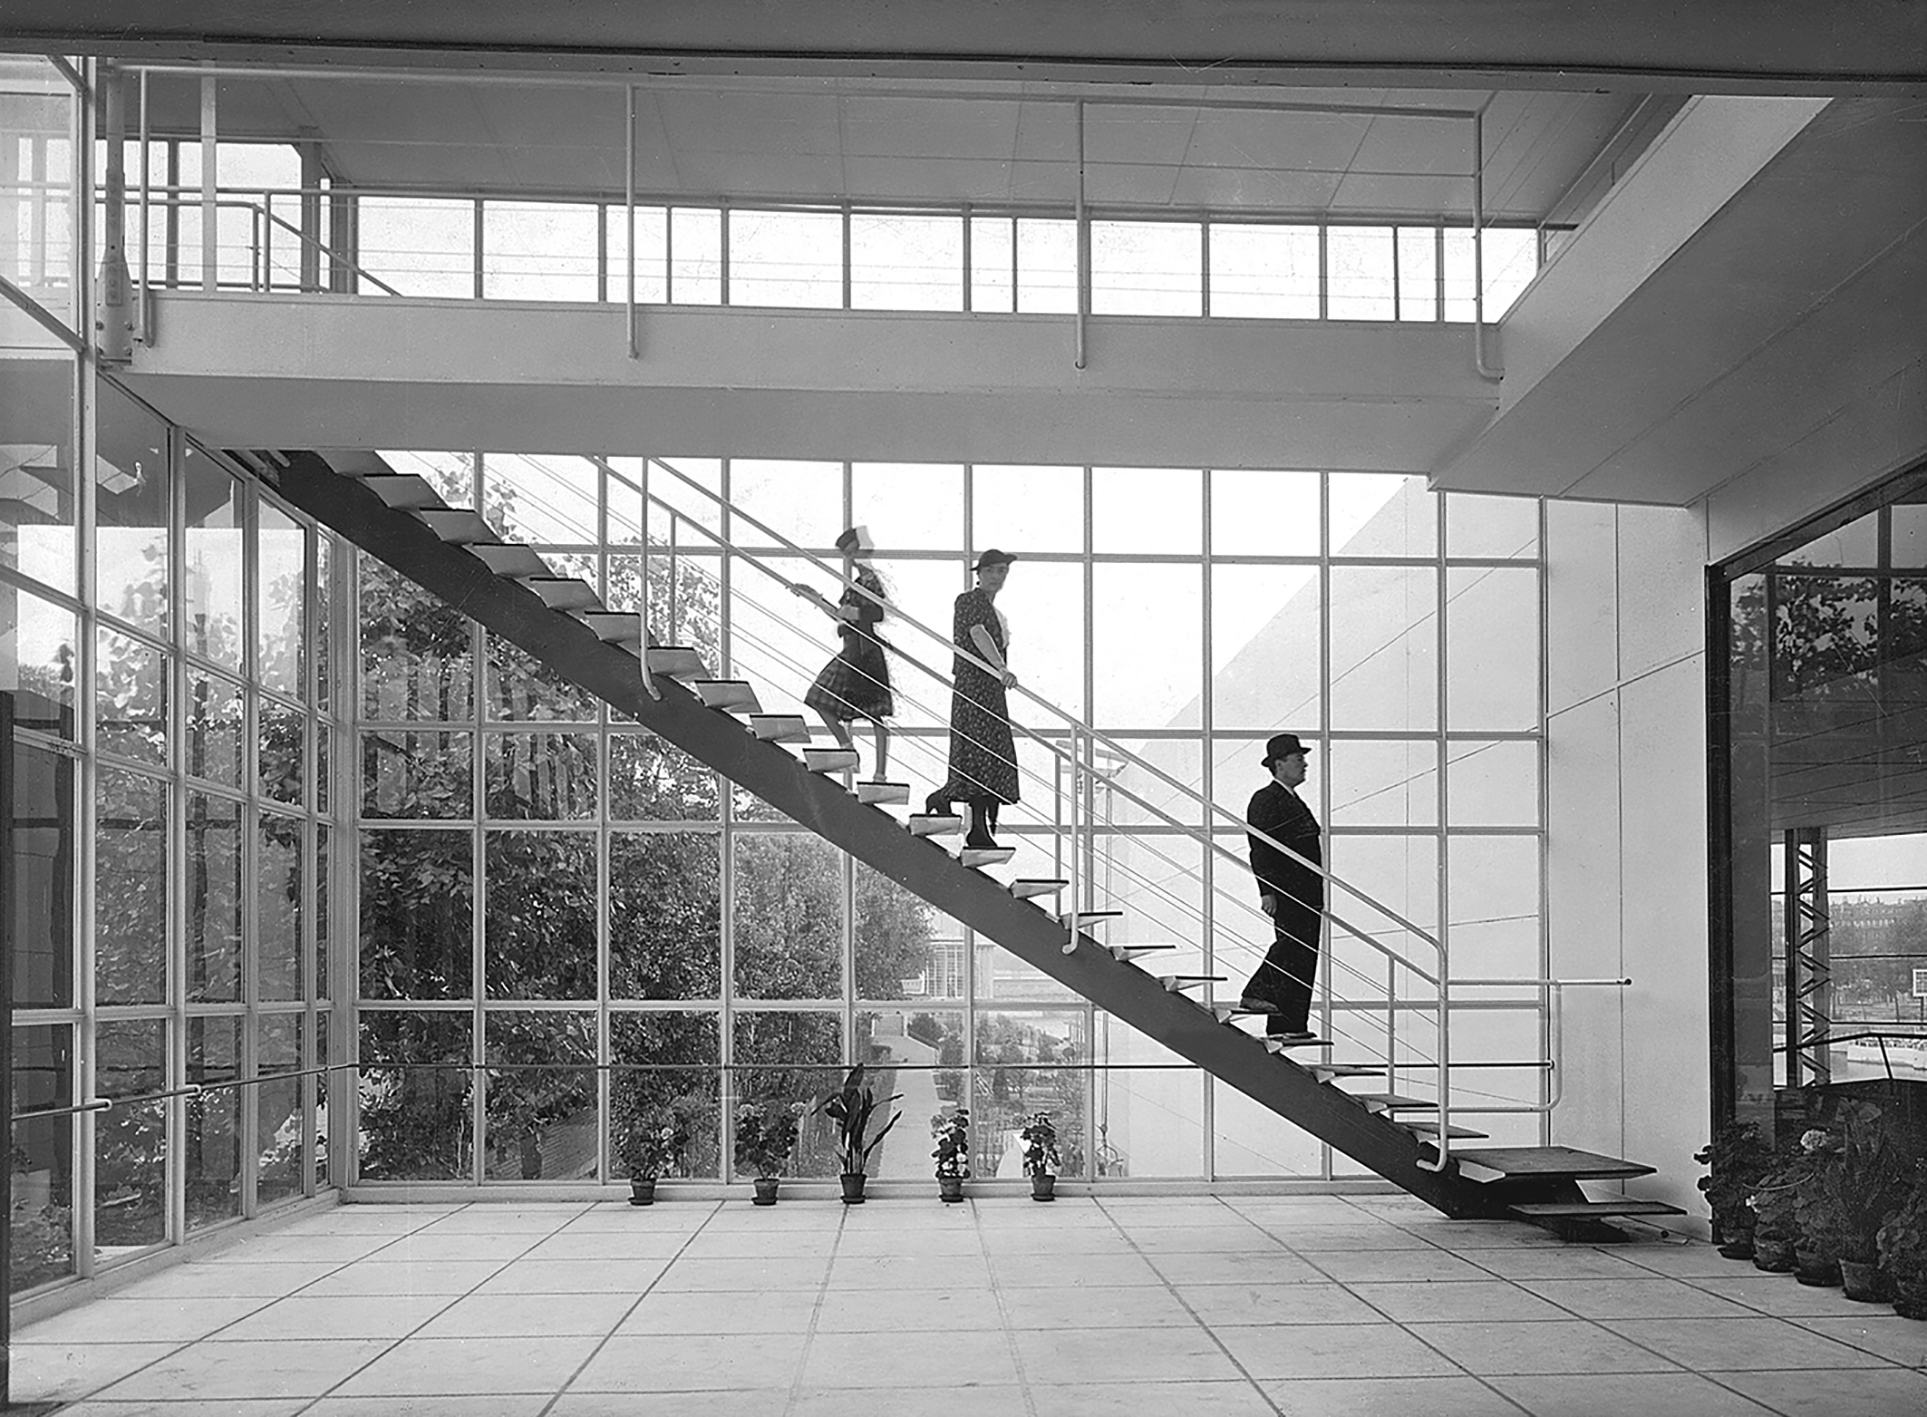 The Union of Modern Artists (UAM) pavilion (architects Pingusson, Jourdain and Louis), “International Exhibition of Art and Technology in Modern Life”, Paris, 1937. Ateliers Jean Prouvé: the central staircase.